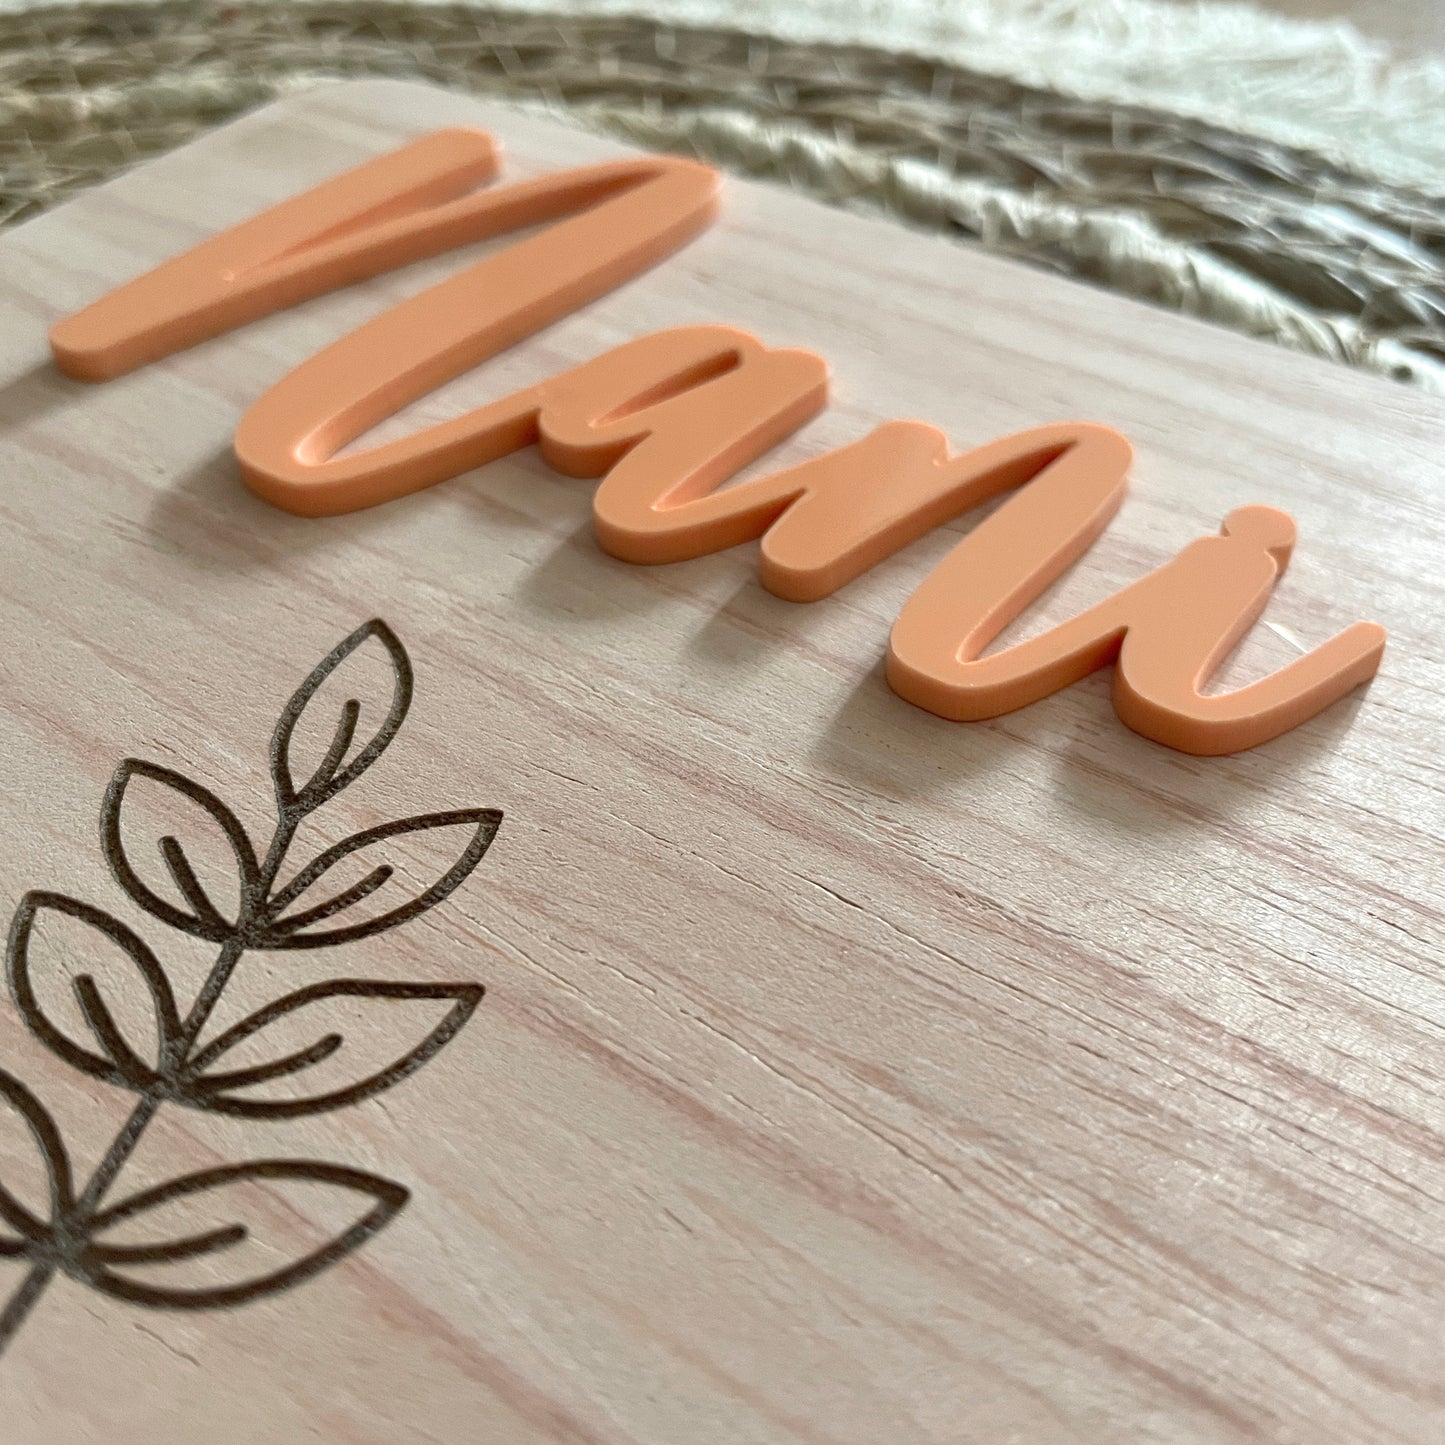 Personalized Mother’s Day Gifts, Custom flower engraved sign for Mom, Gran, Granny, Aunt